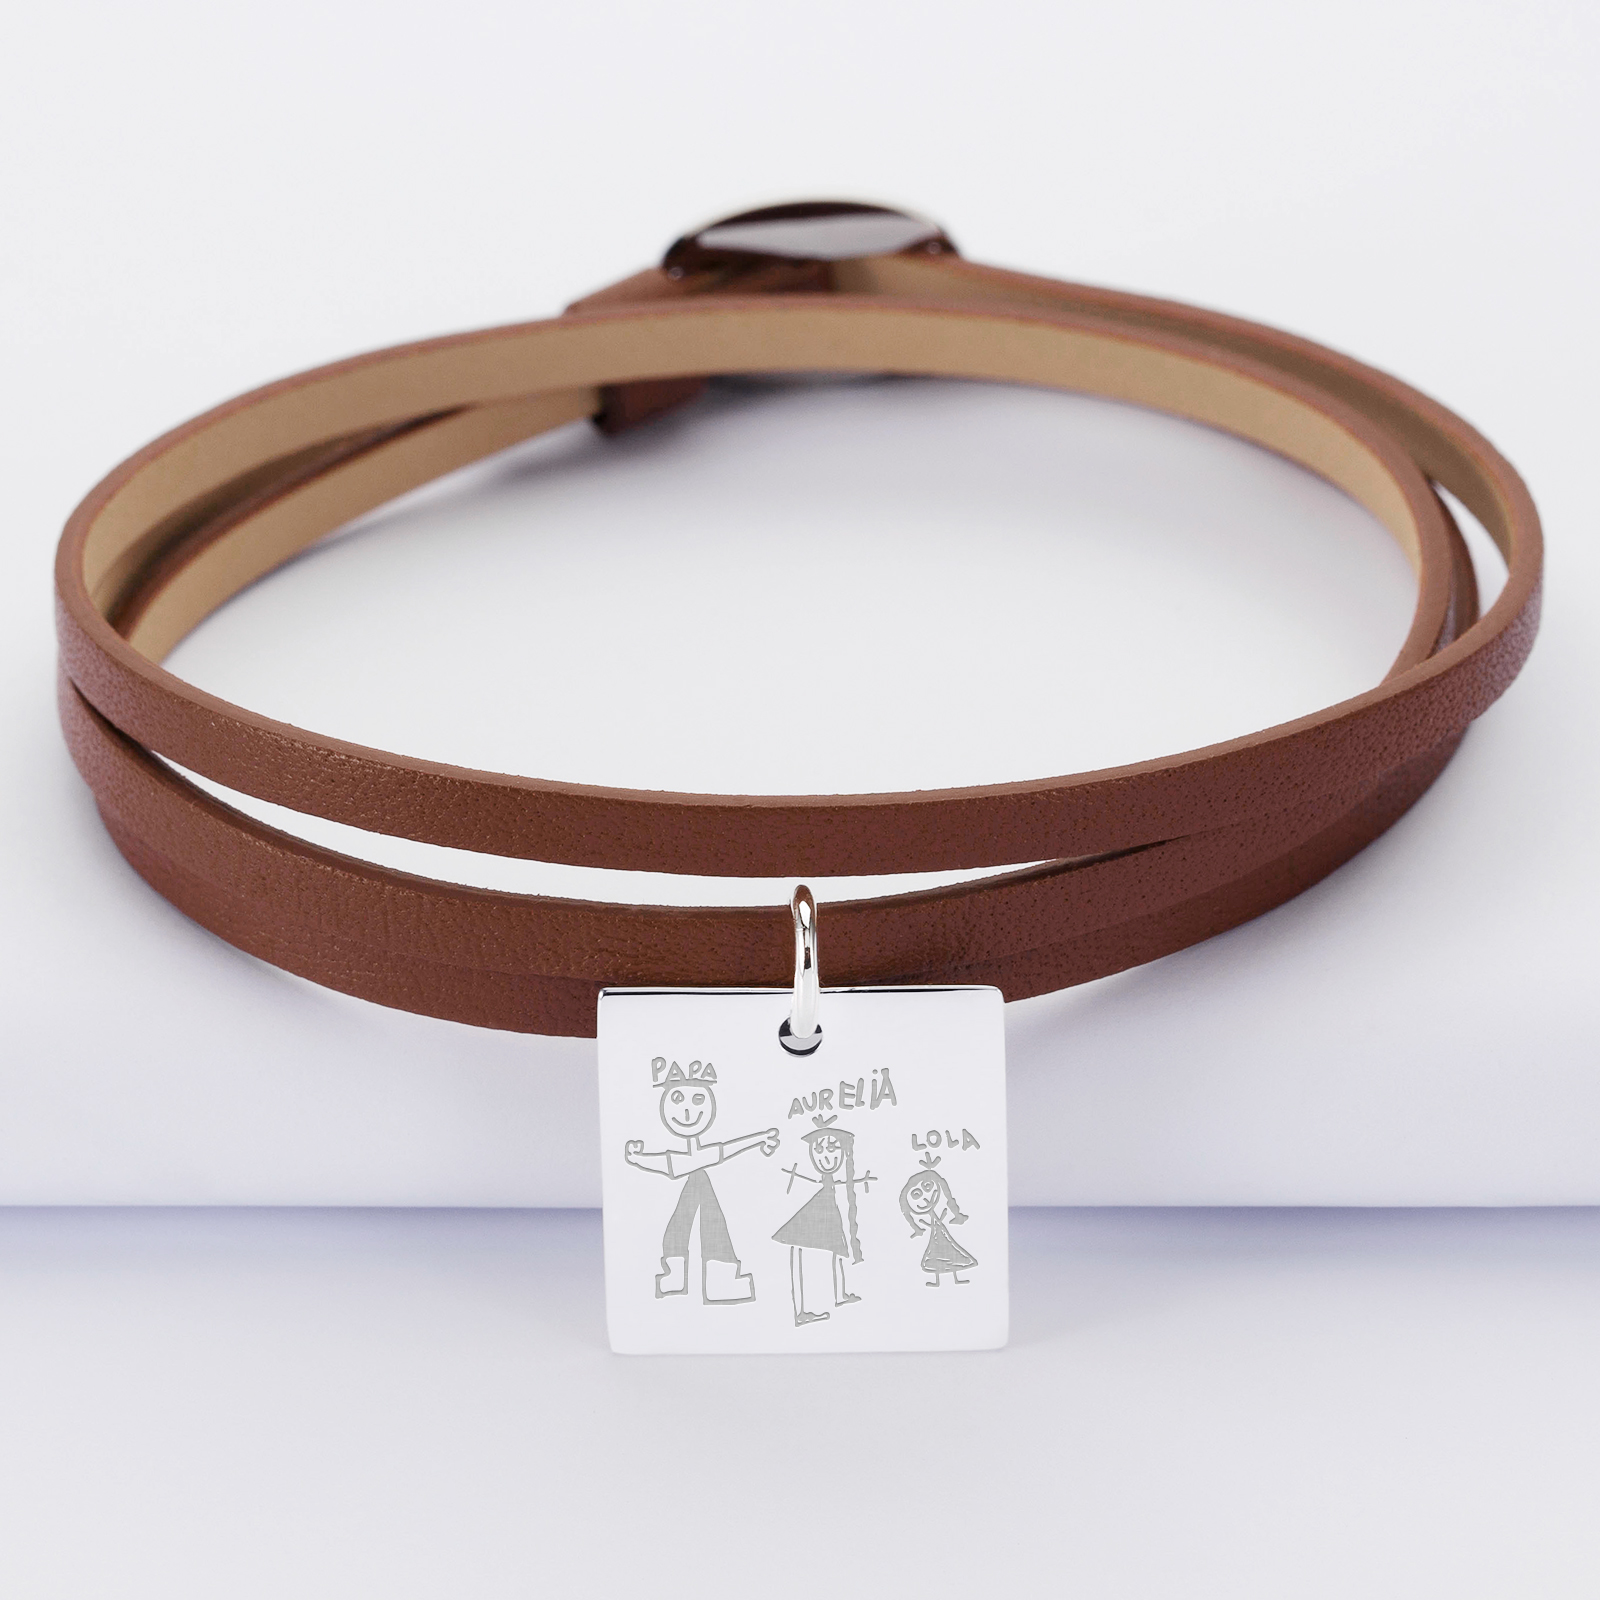 3 turn leather bracelet with personalised engraved square silver sleeper medallion 18x18mm - sketch